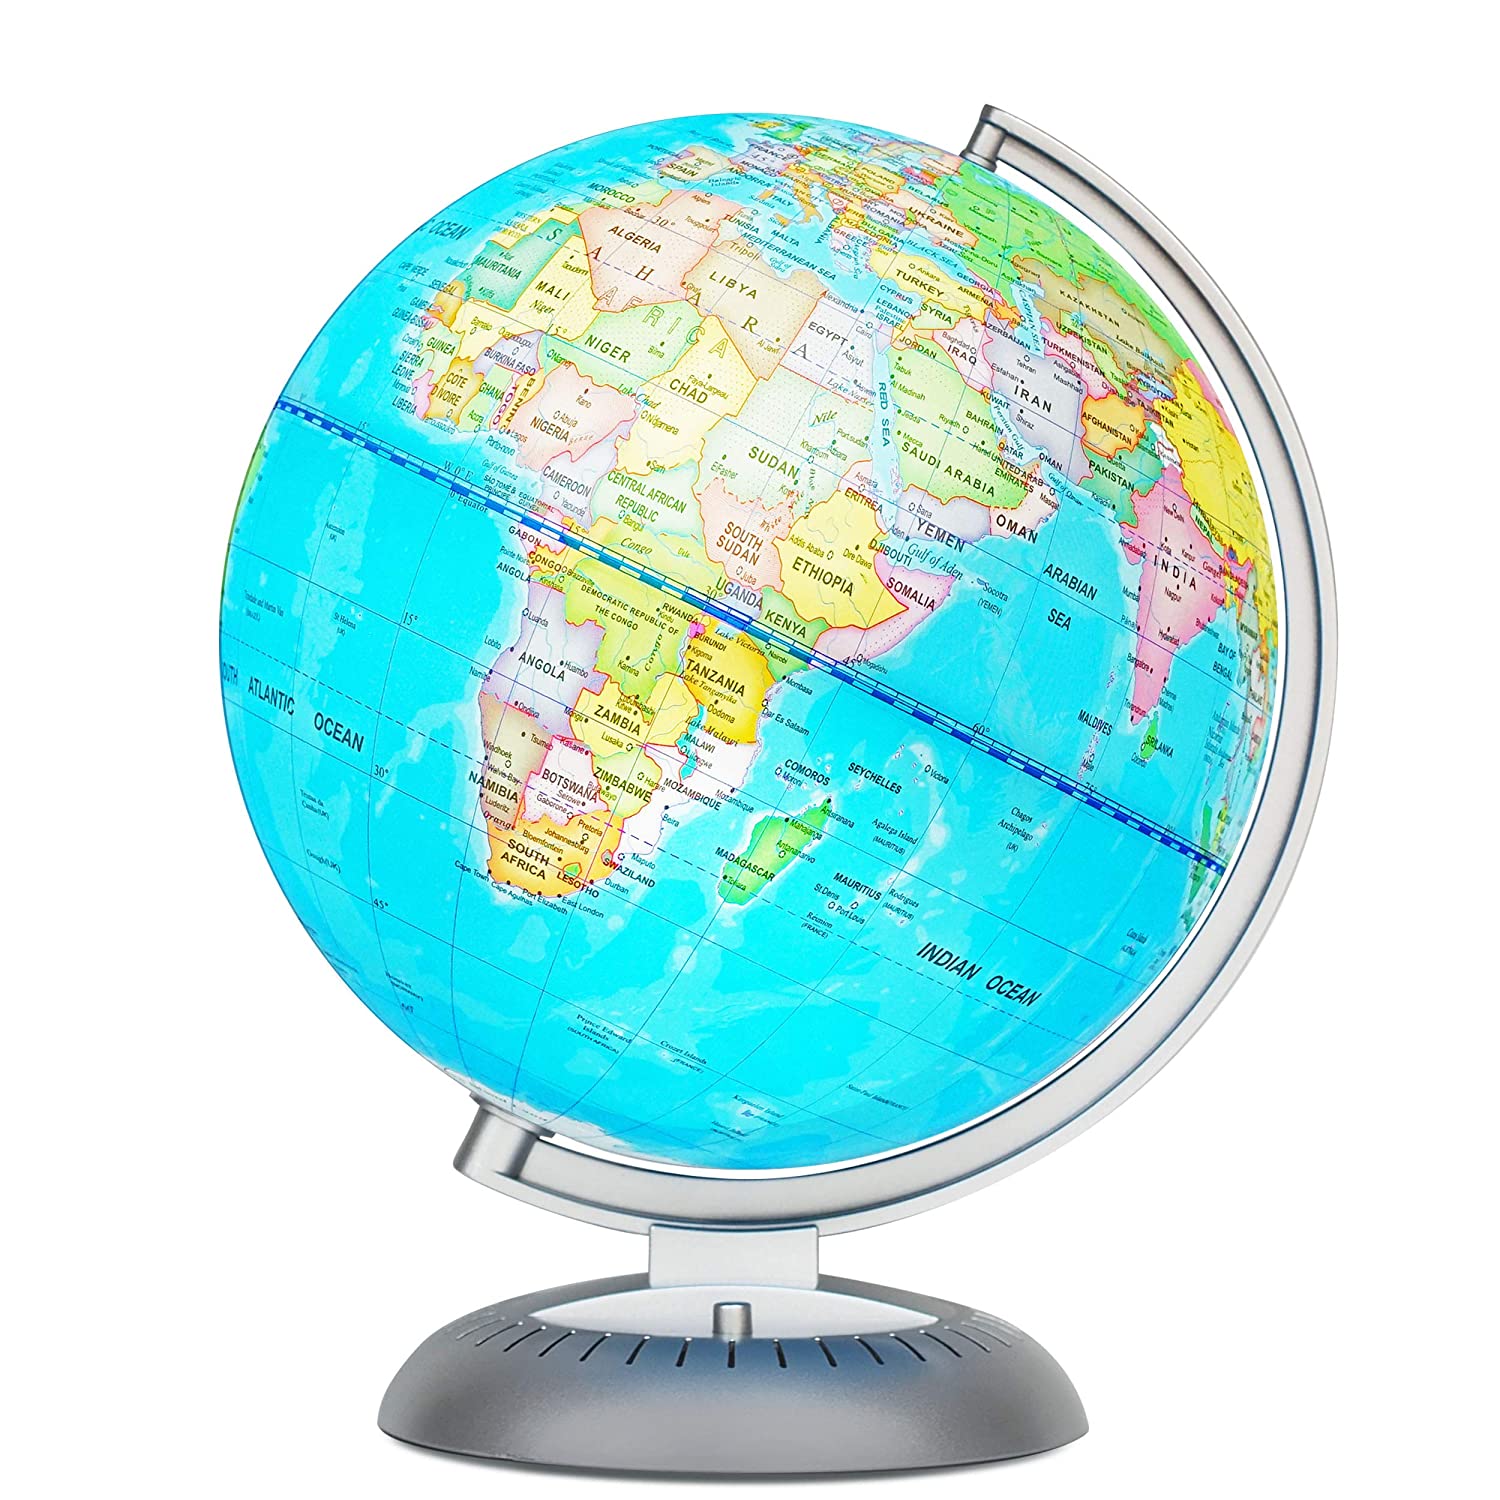 10 Best World Map for Kids 2022 - Buying Guide & Reviews 2